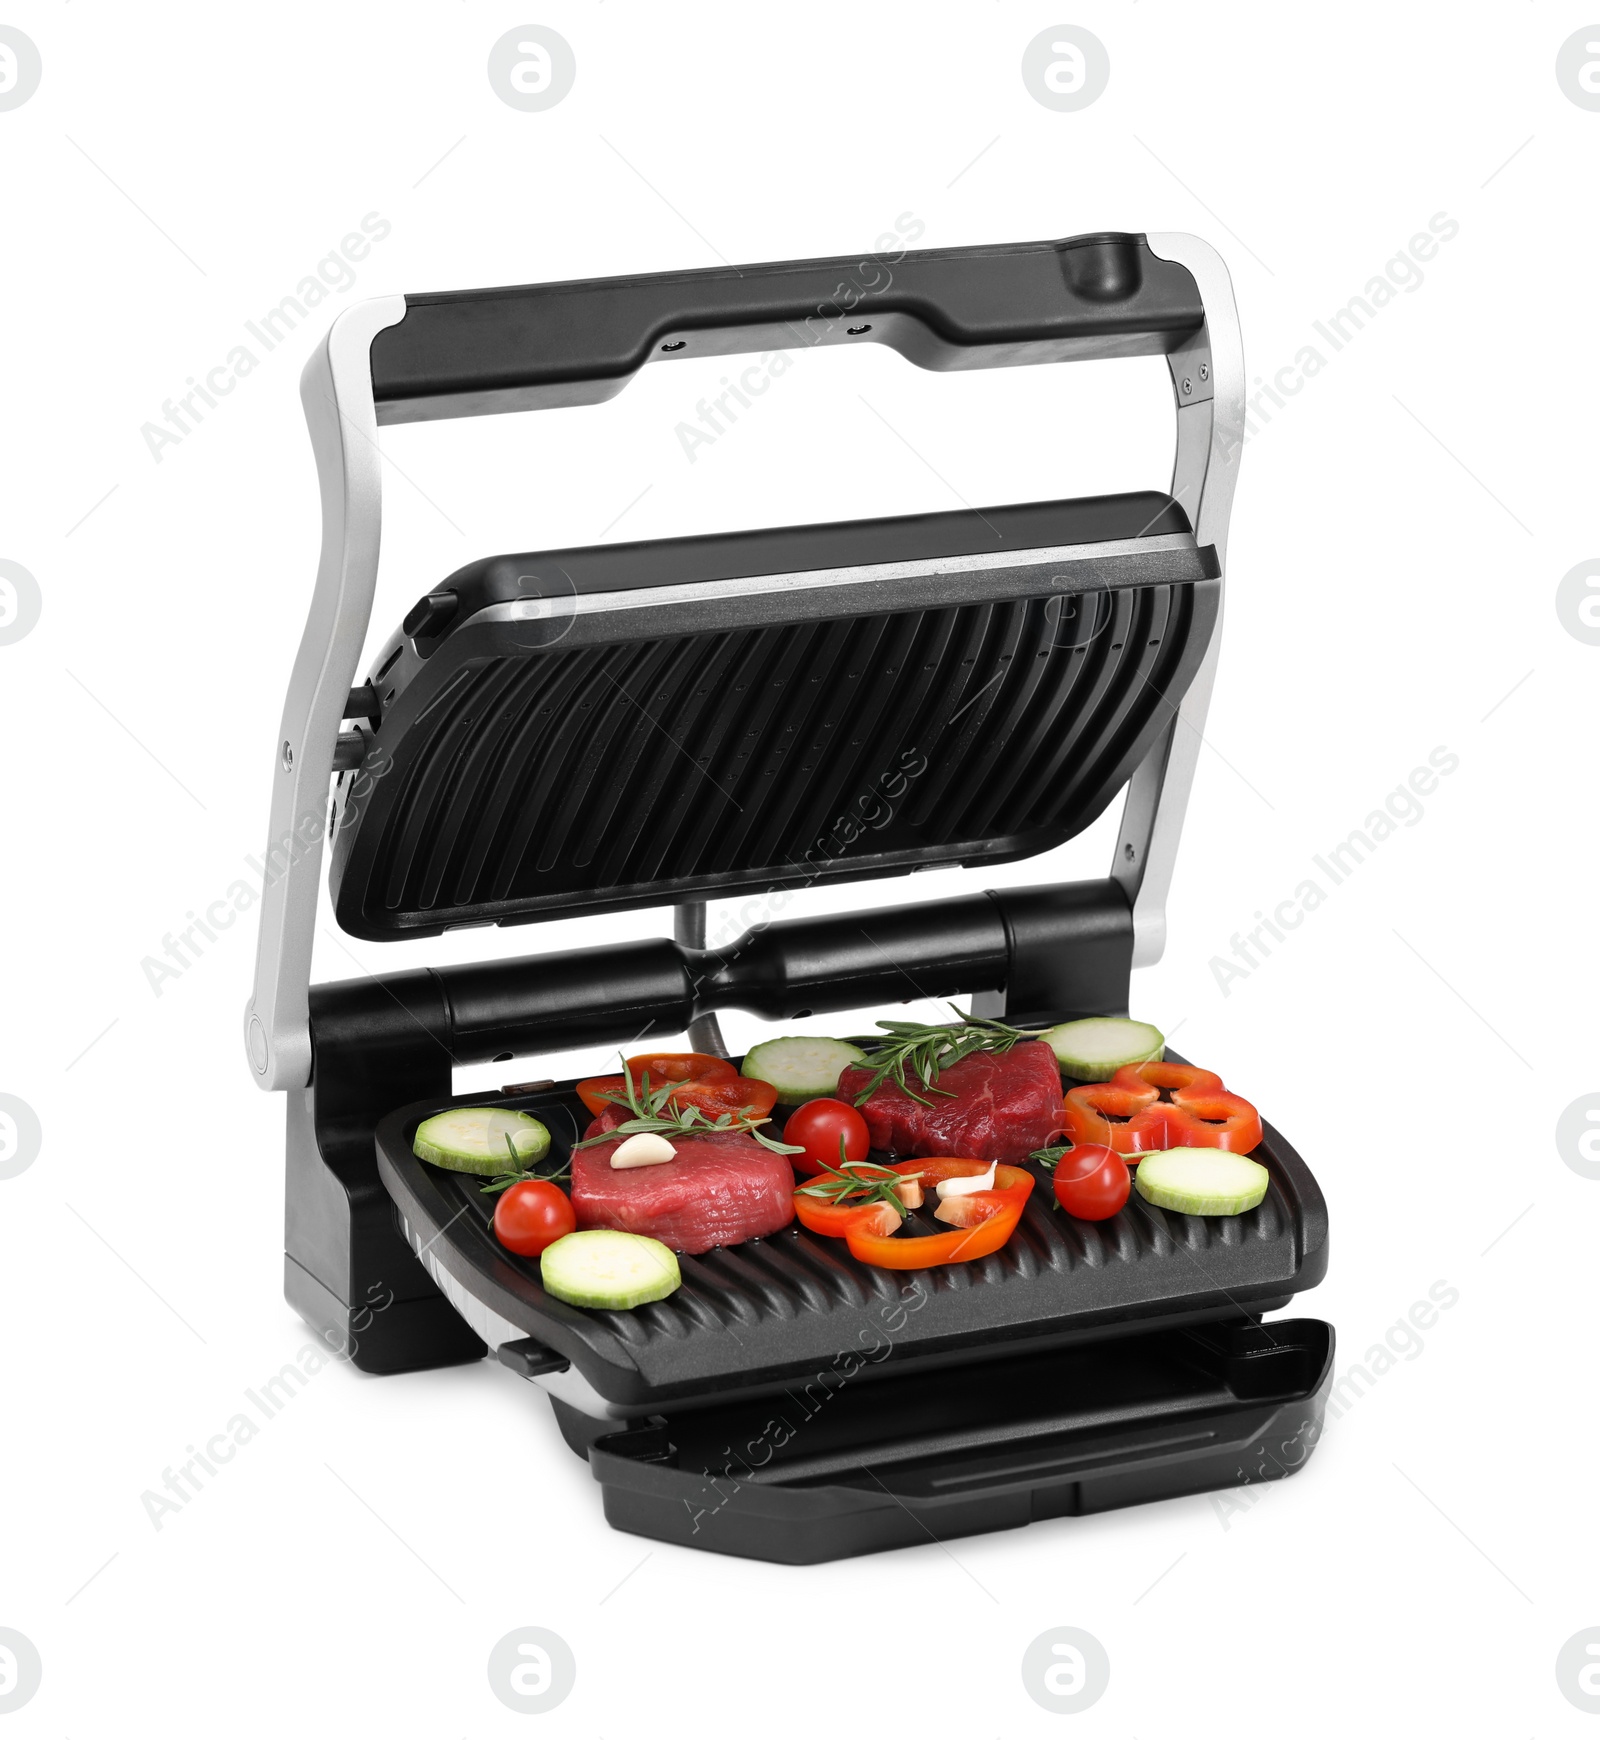 Photo of Electric grill with raw meat, rosemary and vegetables isolated on white